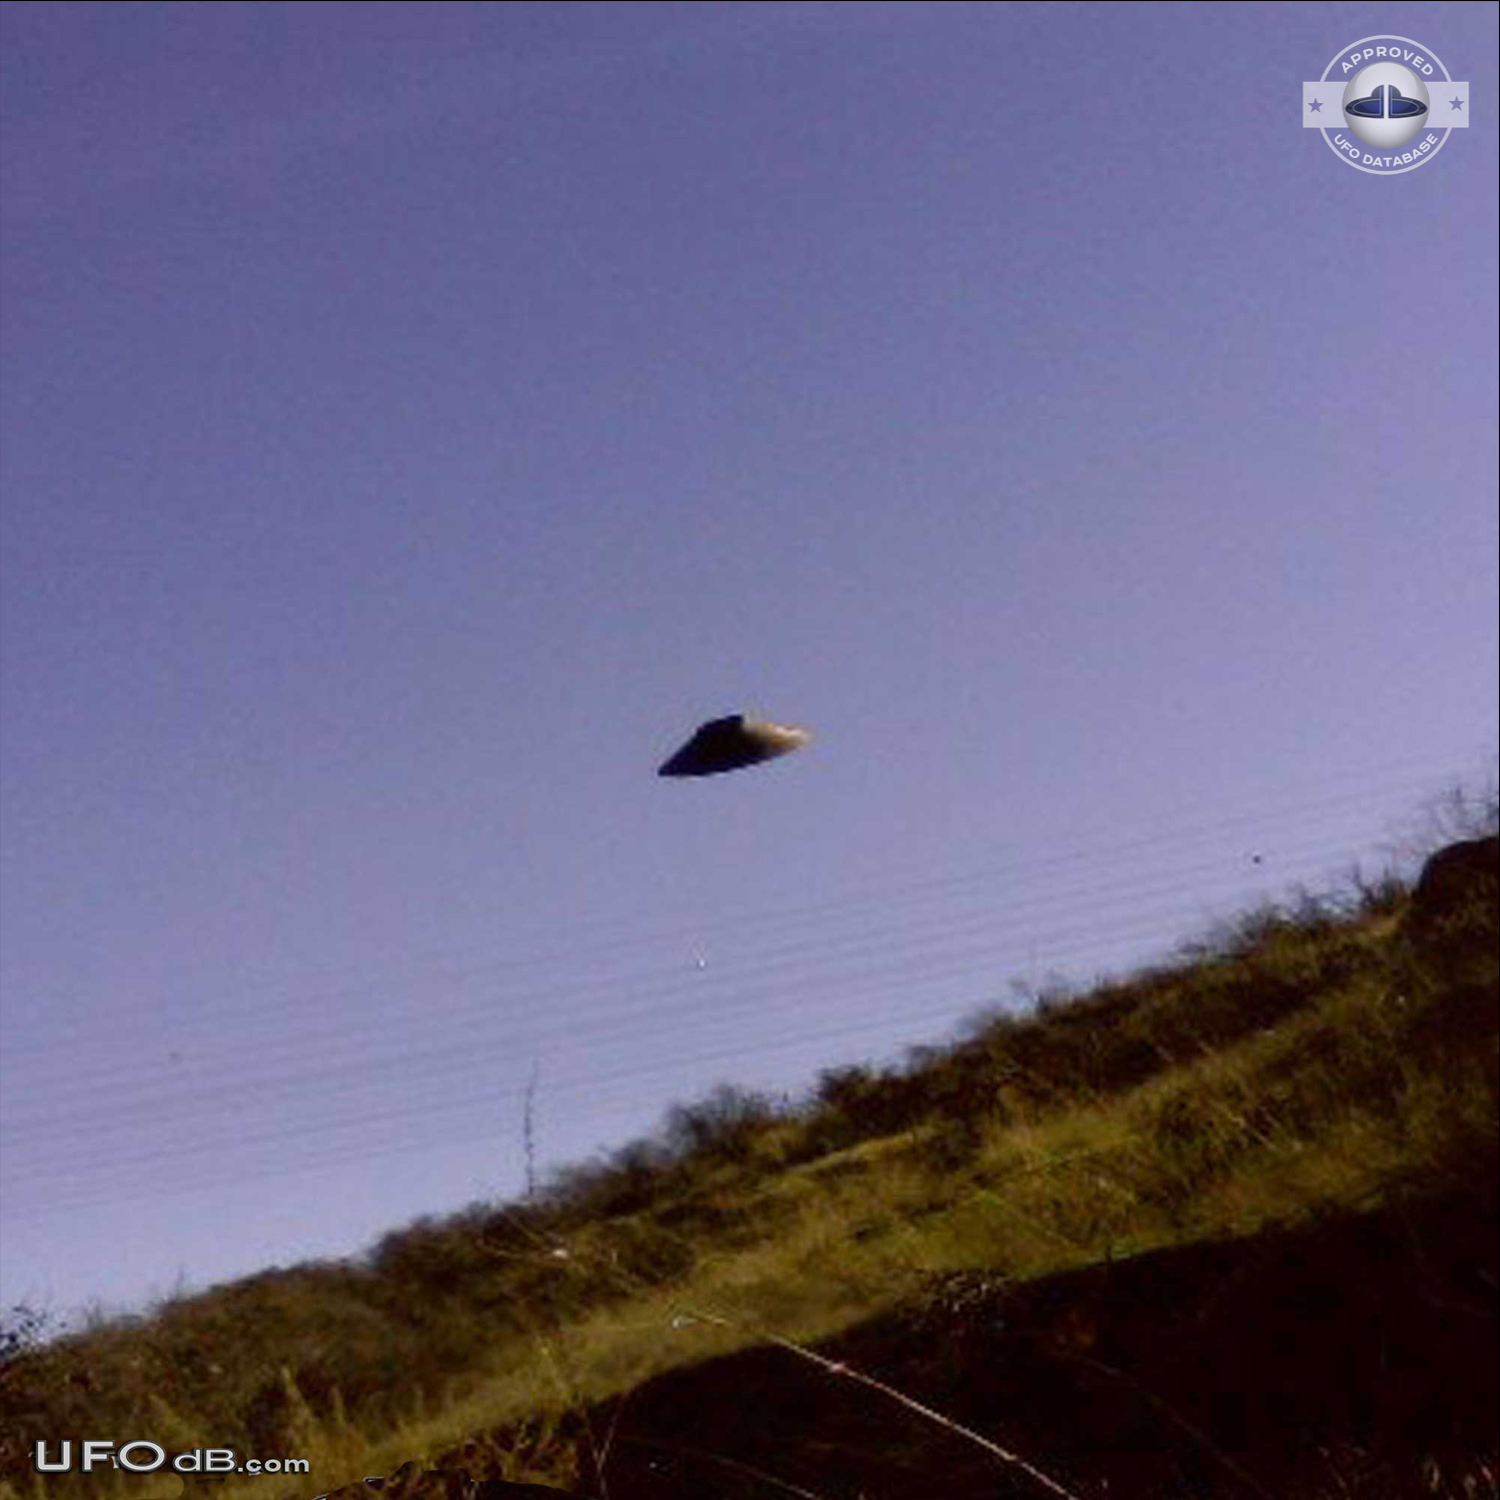 UFO Pictures 2009 UFO over San Diego County California United states. UFO Picture #429-1